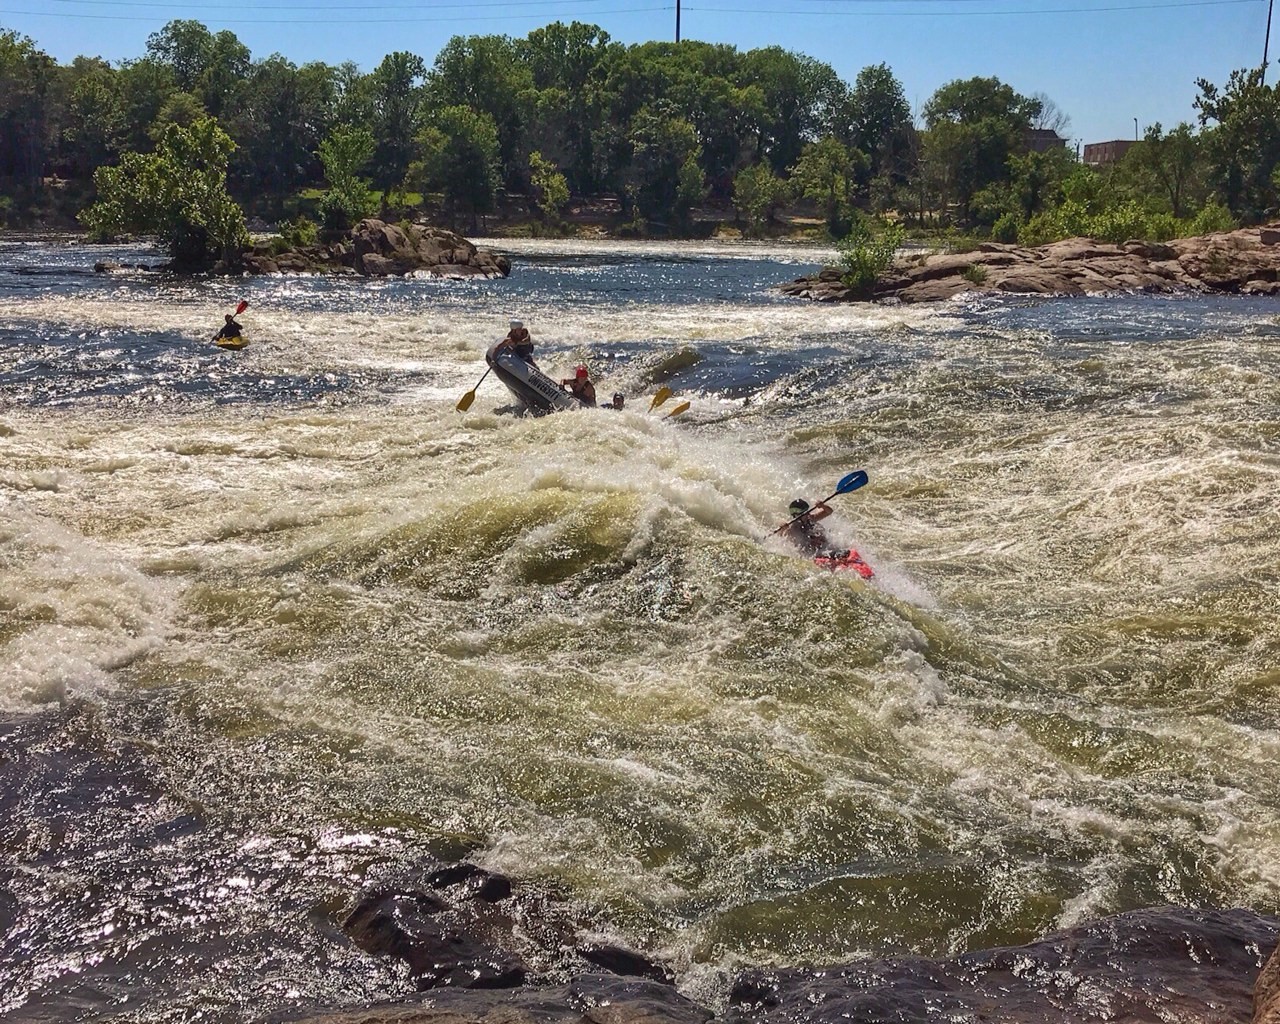 Columbus, Georgia has capitalized on the success of its in-town whitewater park to attract visitors and host competition.